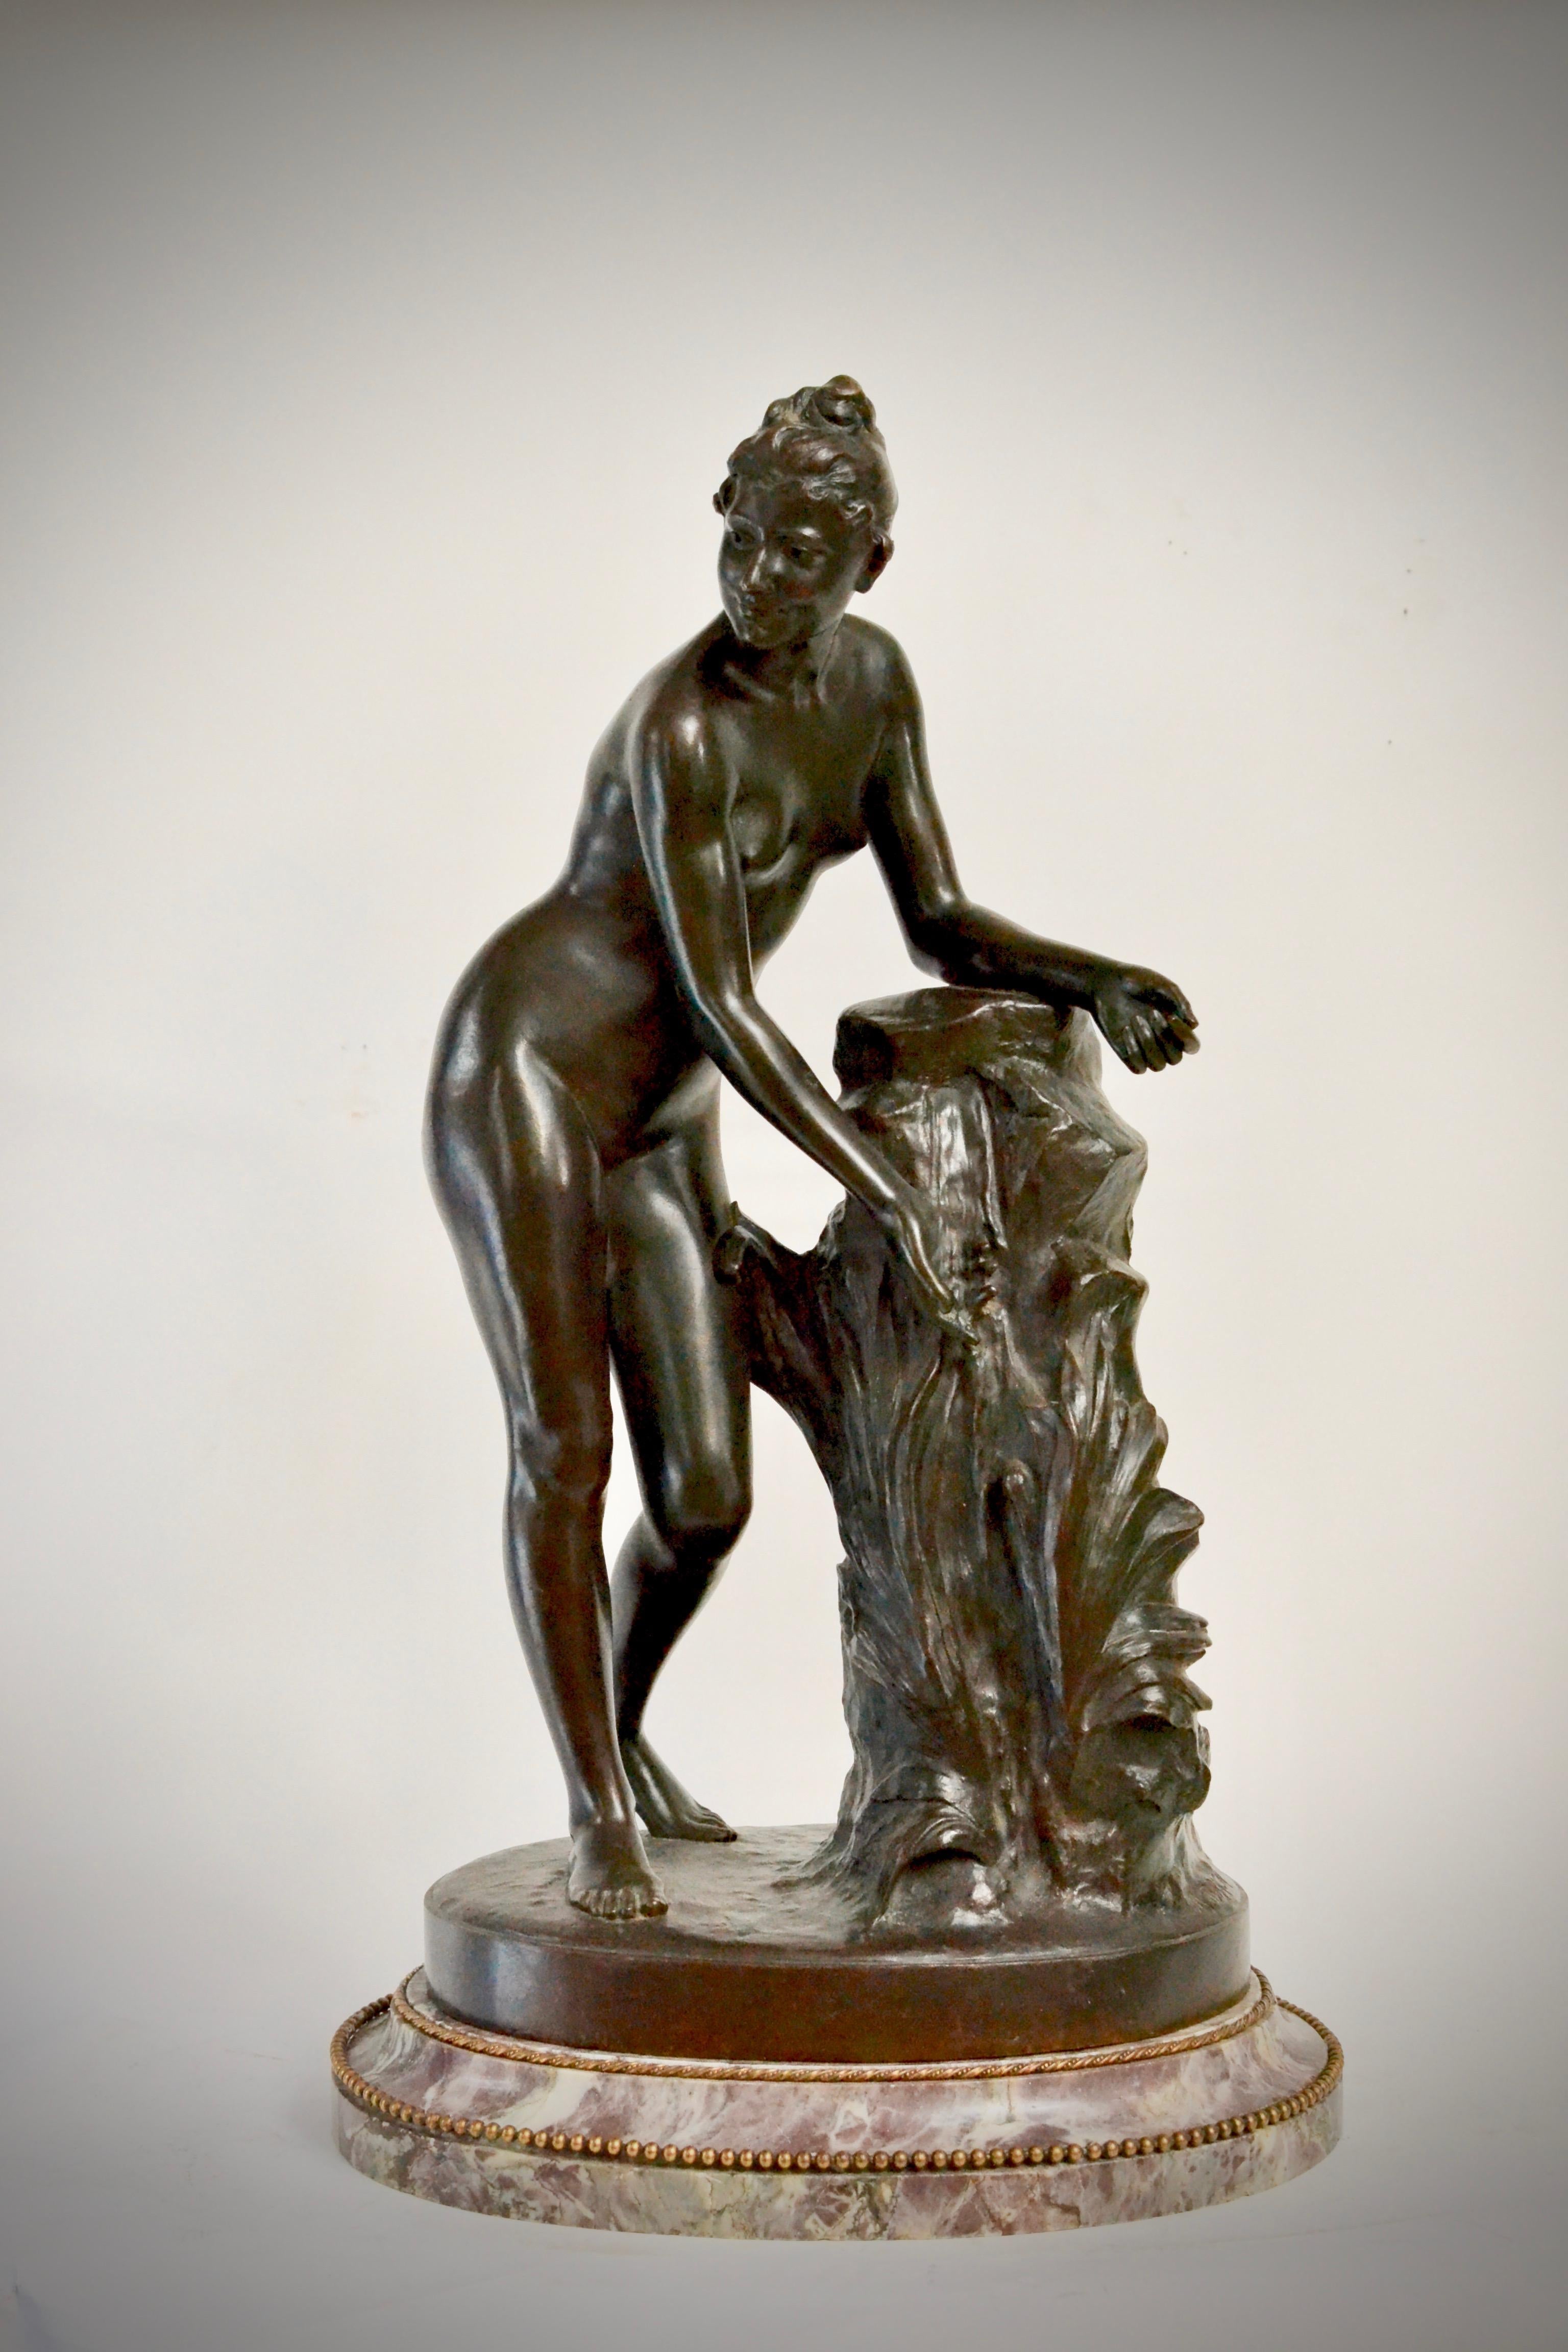 Bronze sculpture, second half of the 19th century. Patinated bronze sculpture of a standing woman signed Malvina Brach.